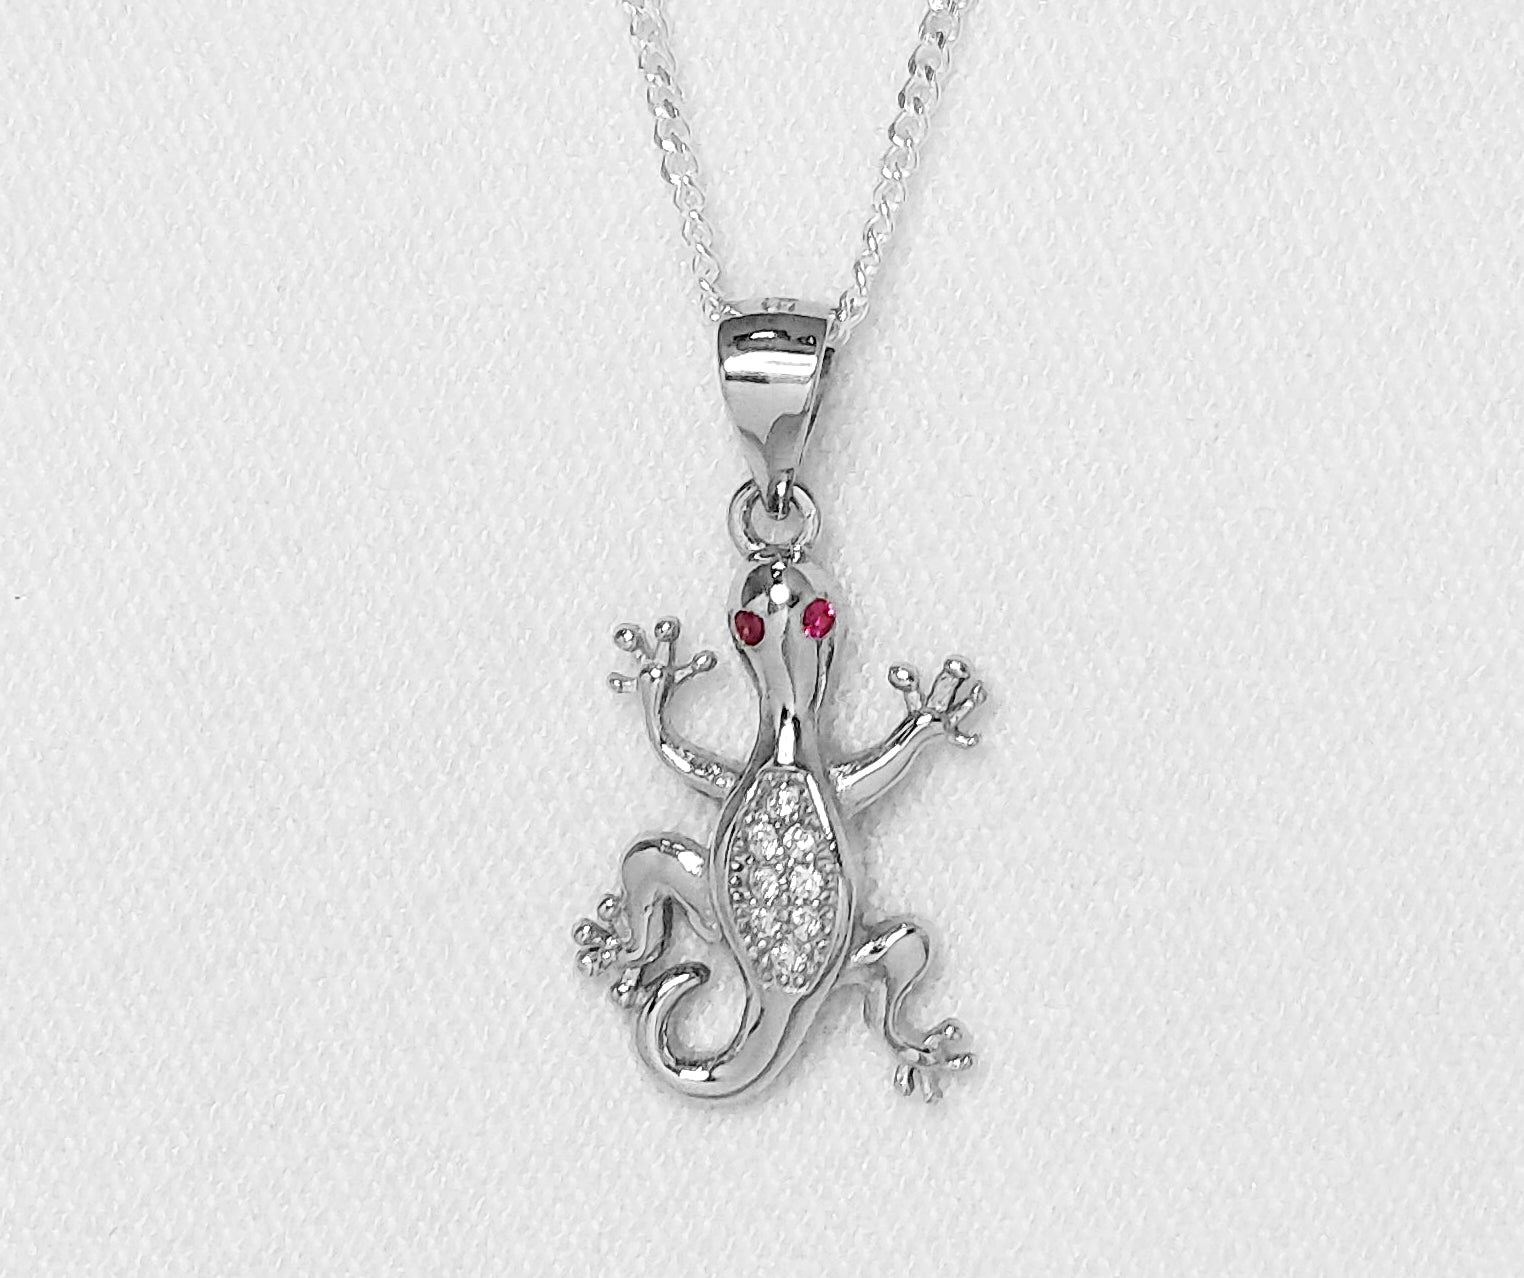 Sterling Silver Lizard Pendant with Cubic Zirconia Stones